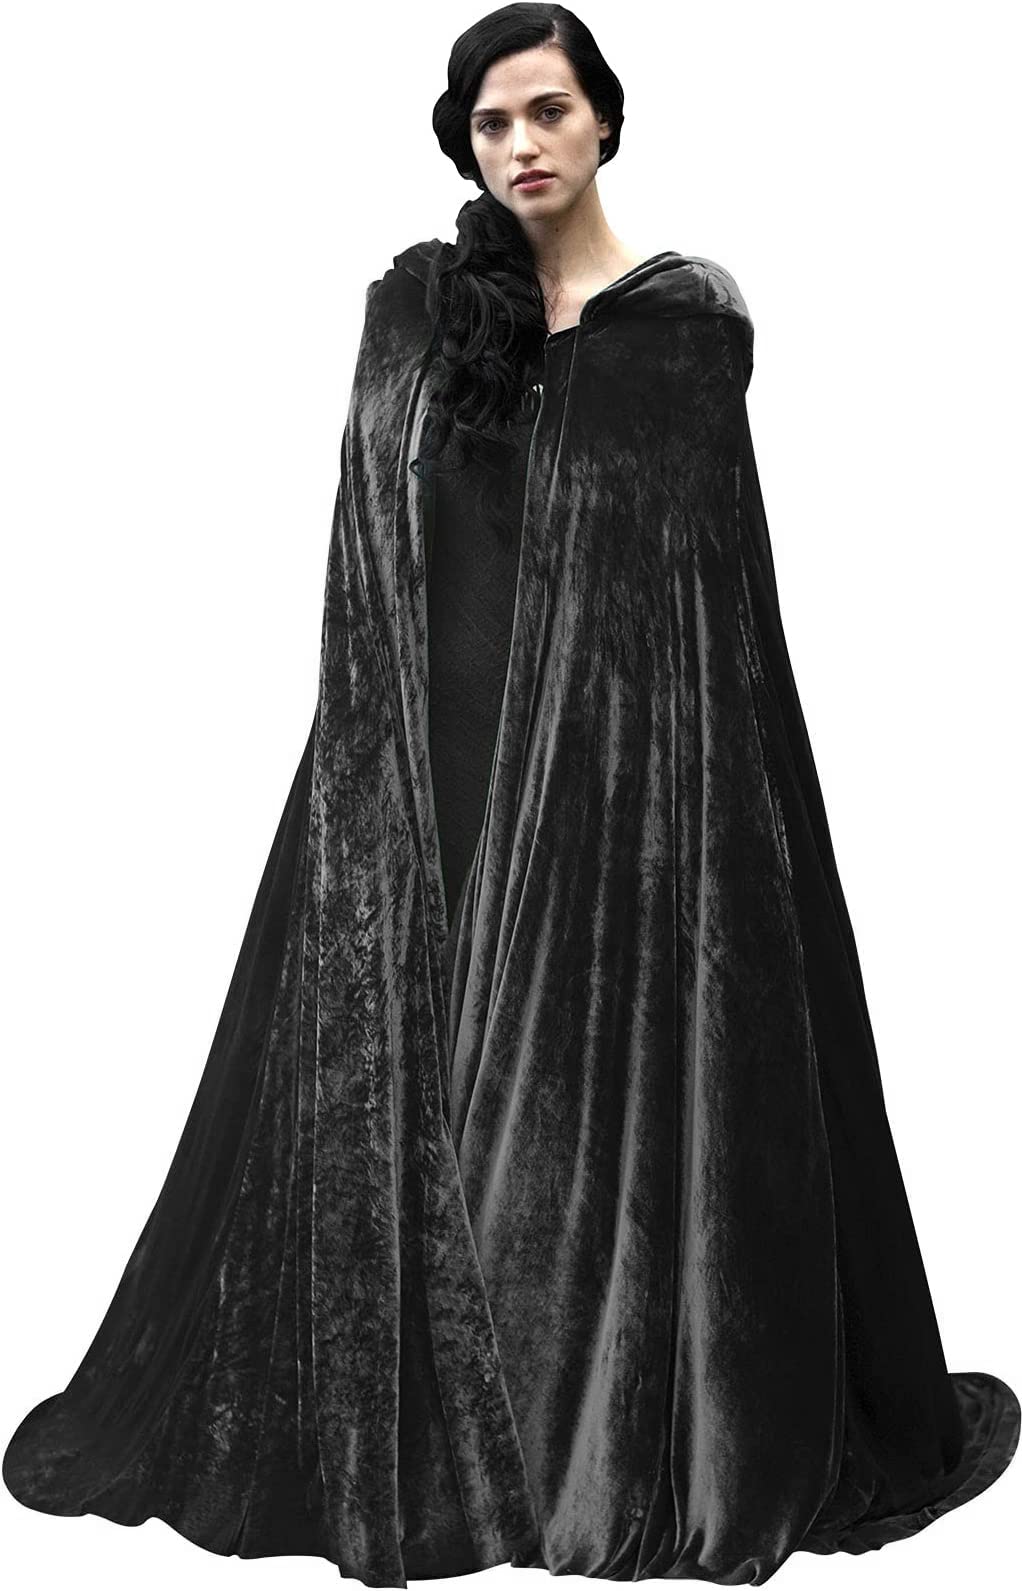 HOMELEX Black Witch Velvet Cloak Halloween Maleficent Hooded Cape Queen King Robe Outfit Renaissance Medieval Costume Green